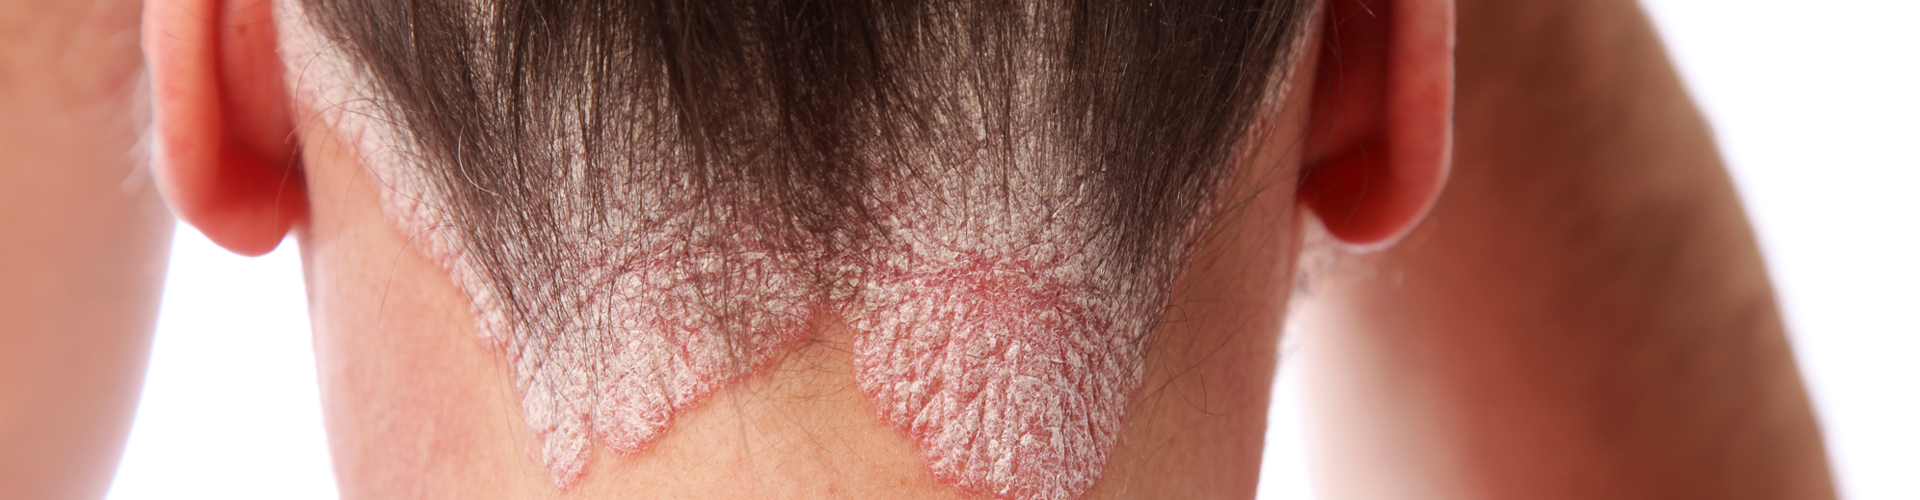 Psoriasis and Eczema Treatment Options in Plano TX